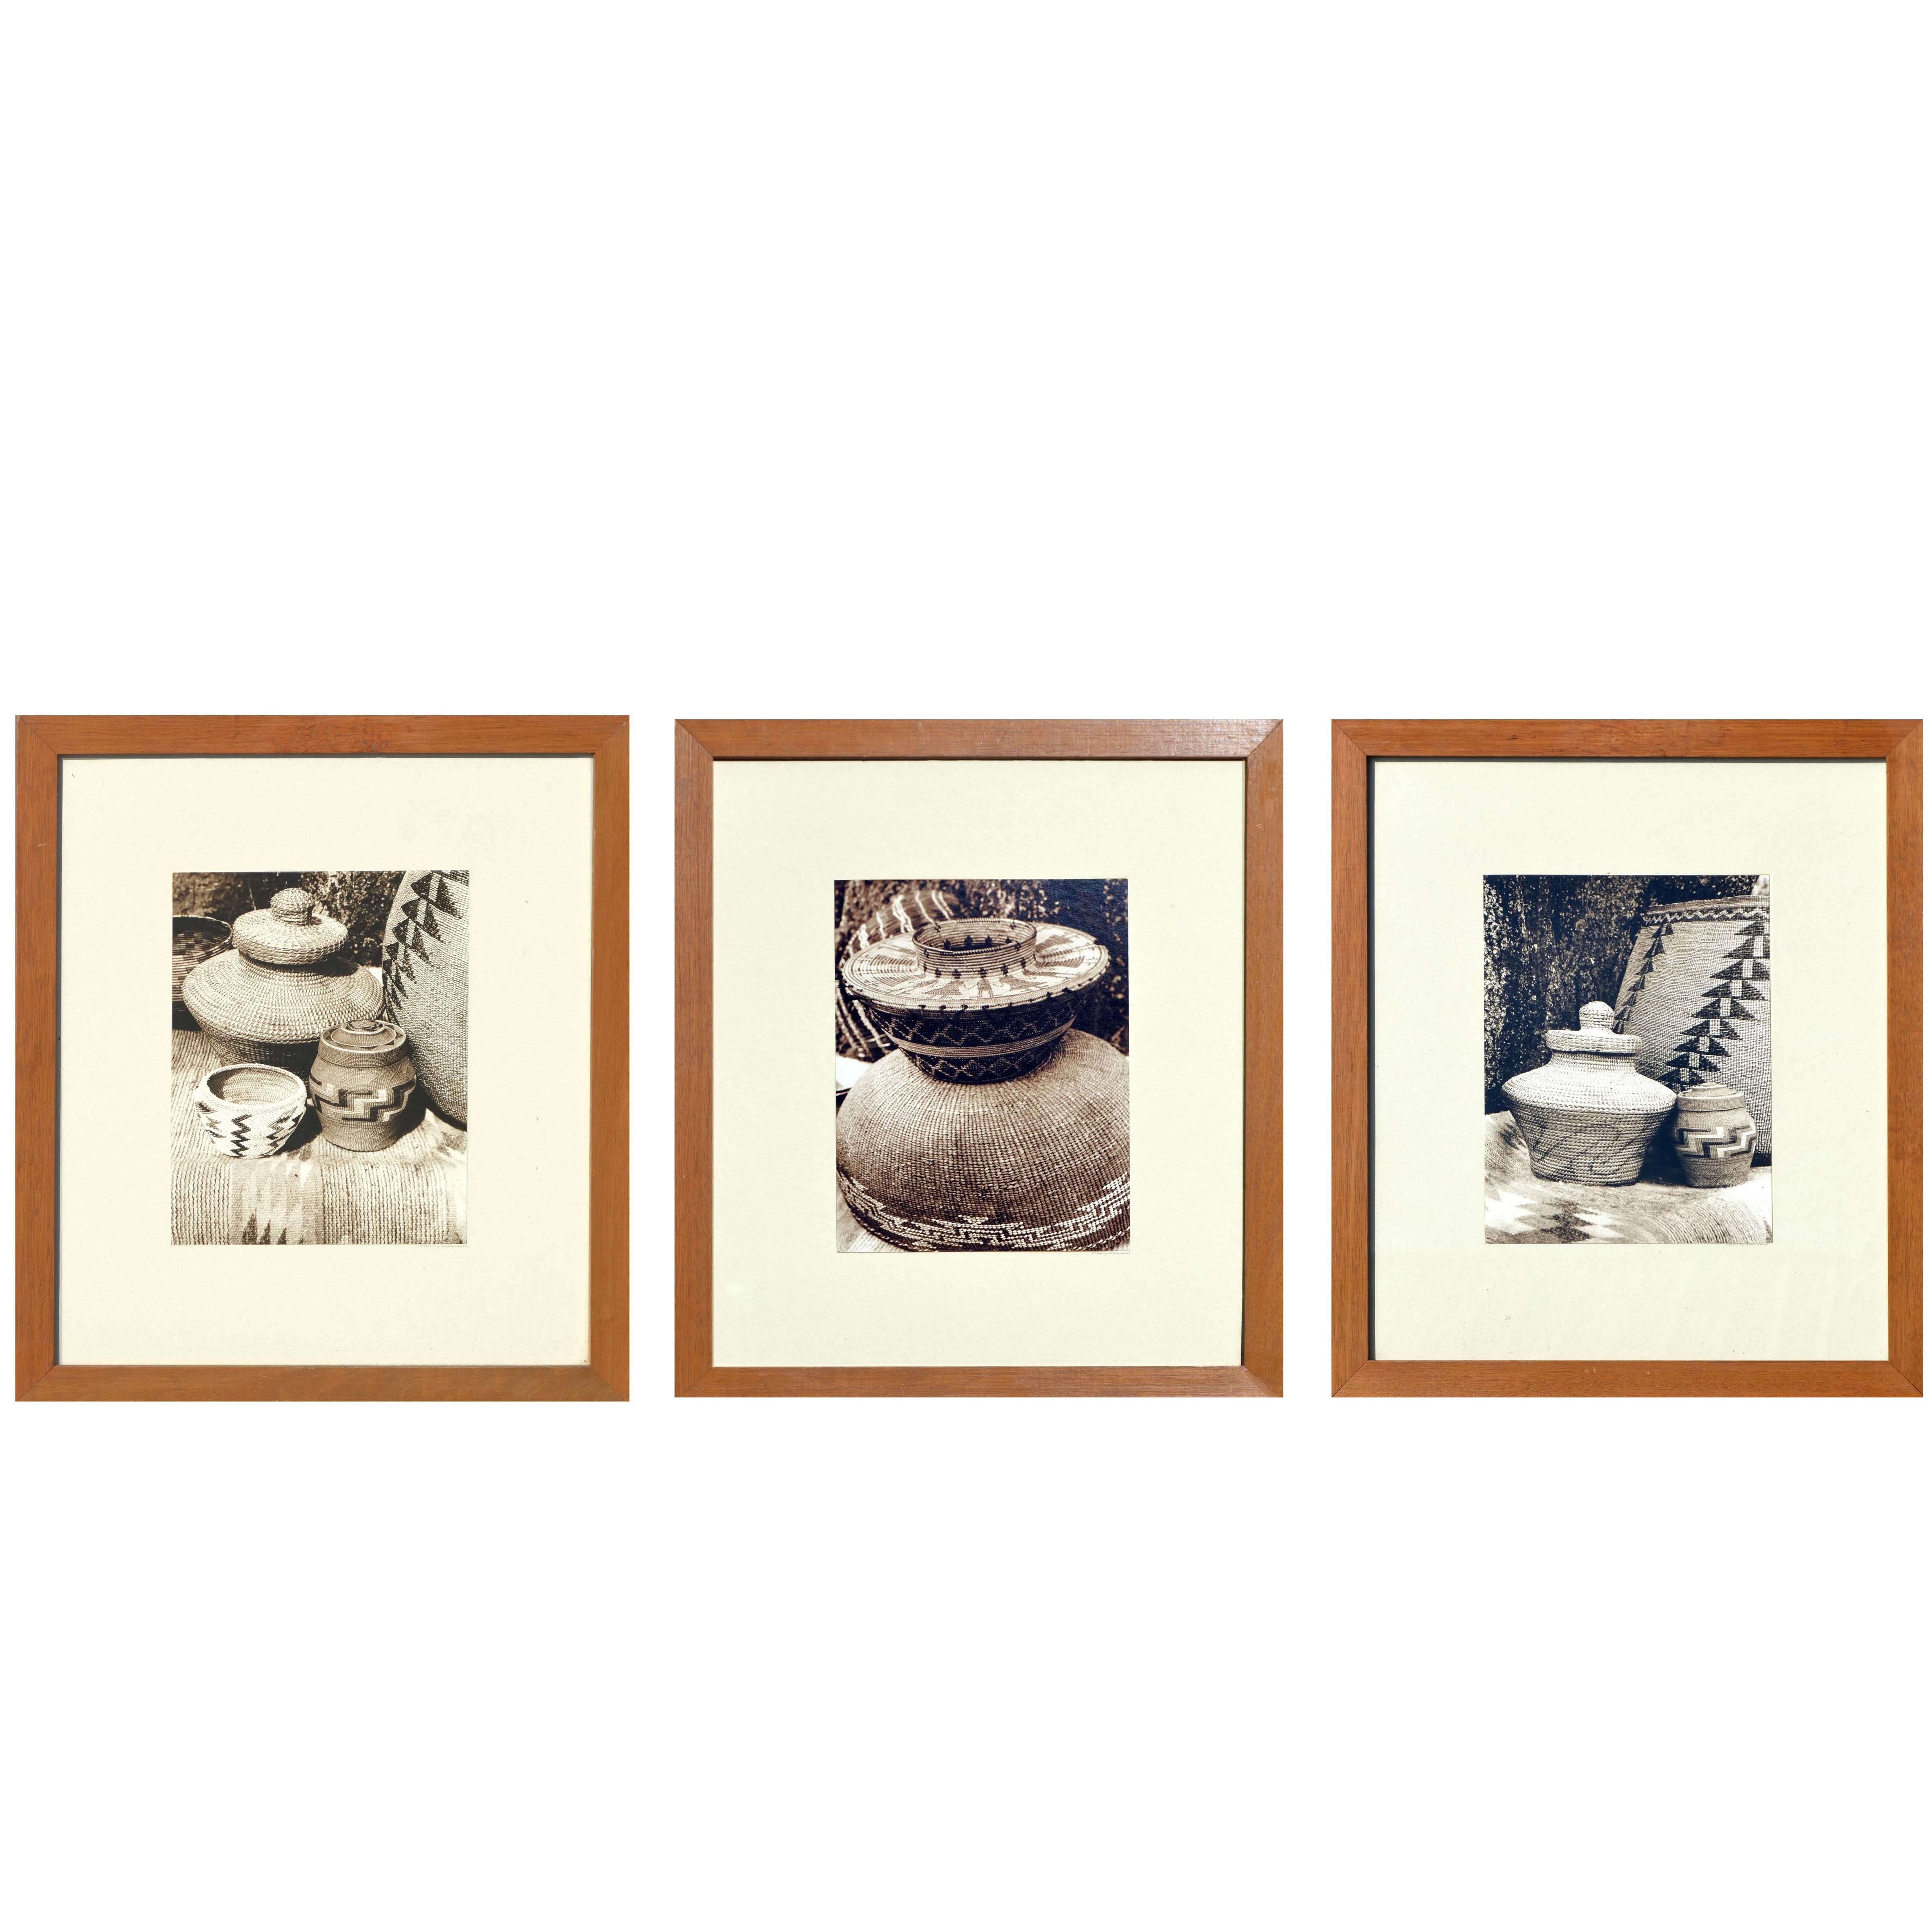 Black and White Photograph Nancy Maynard - Paniers indiens - Lot de 3 photographies